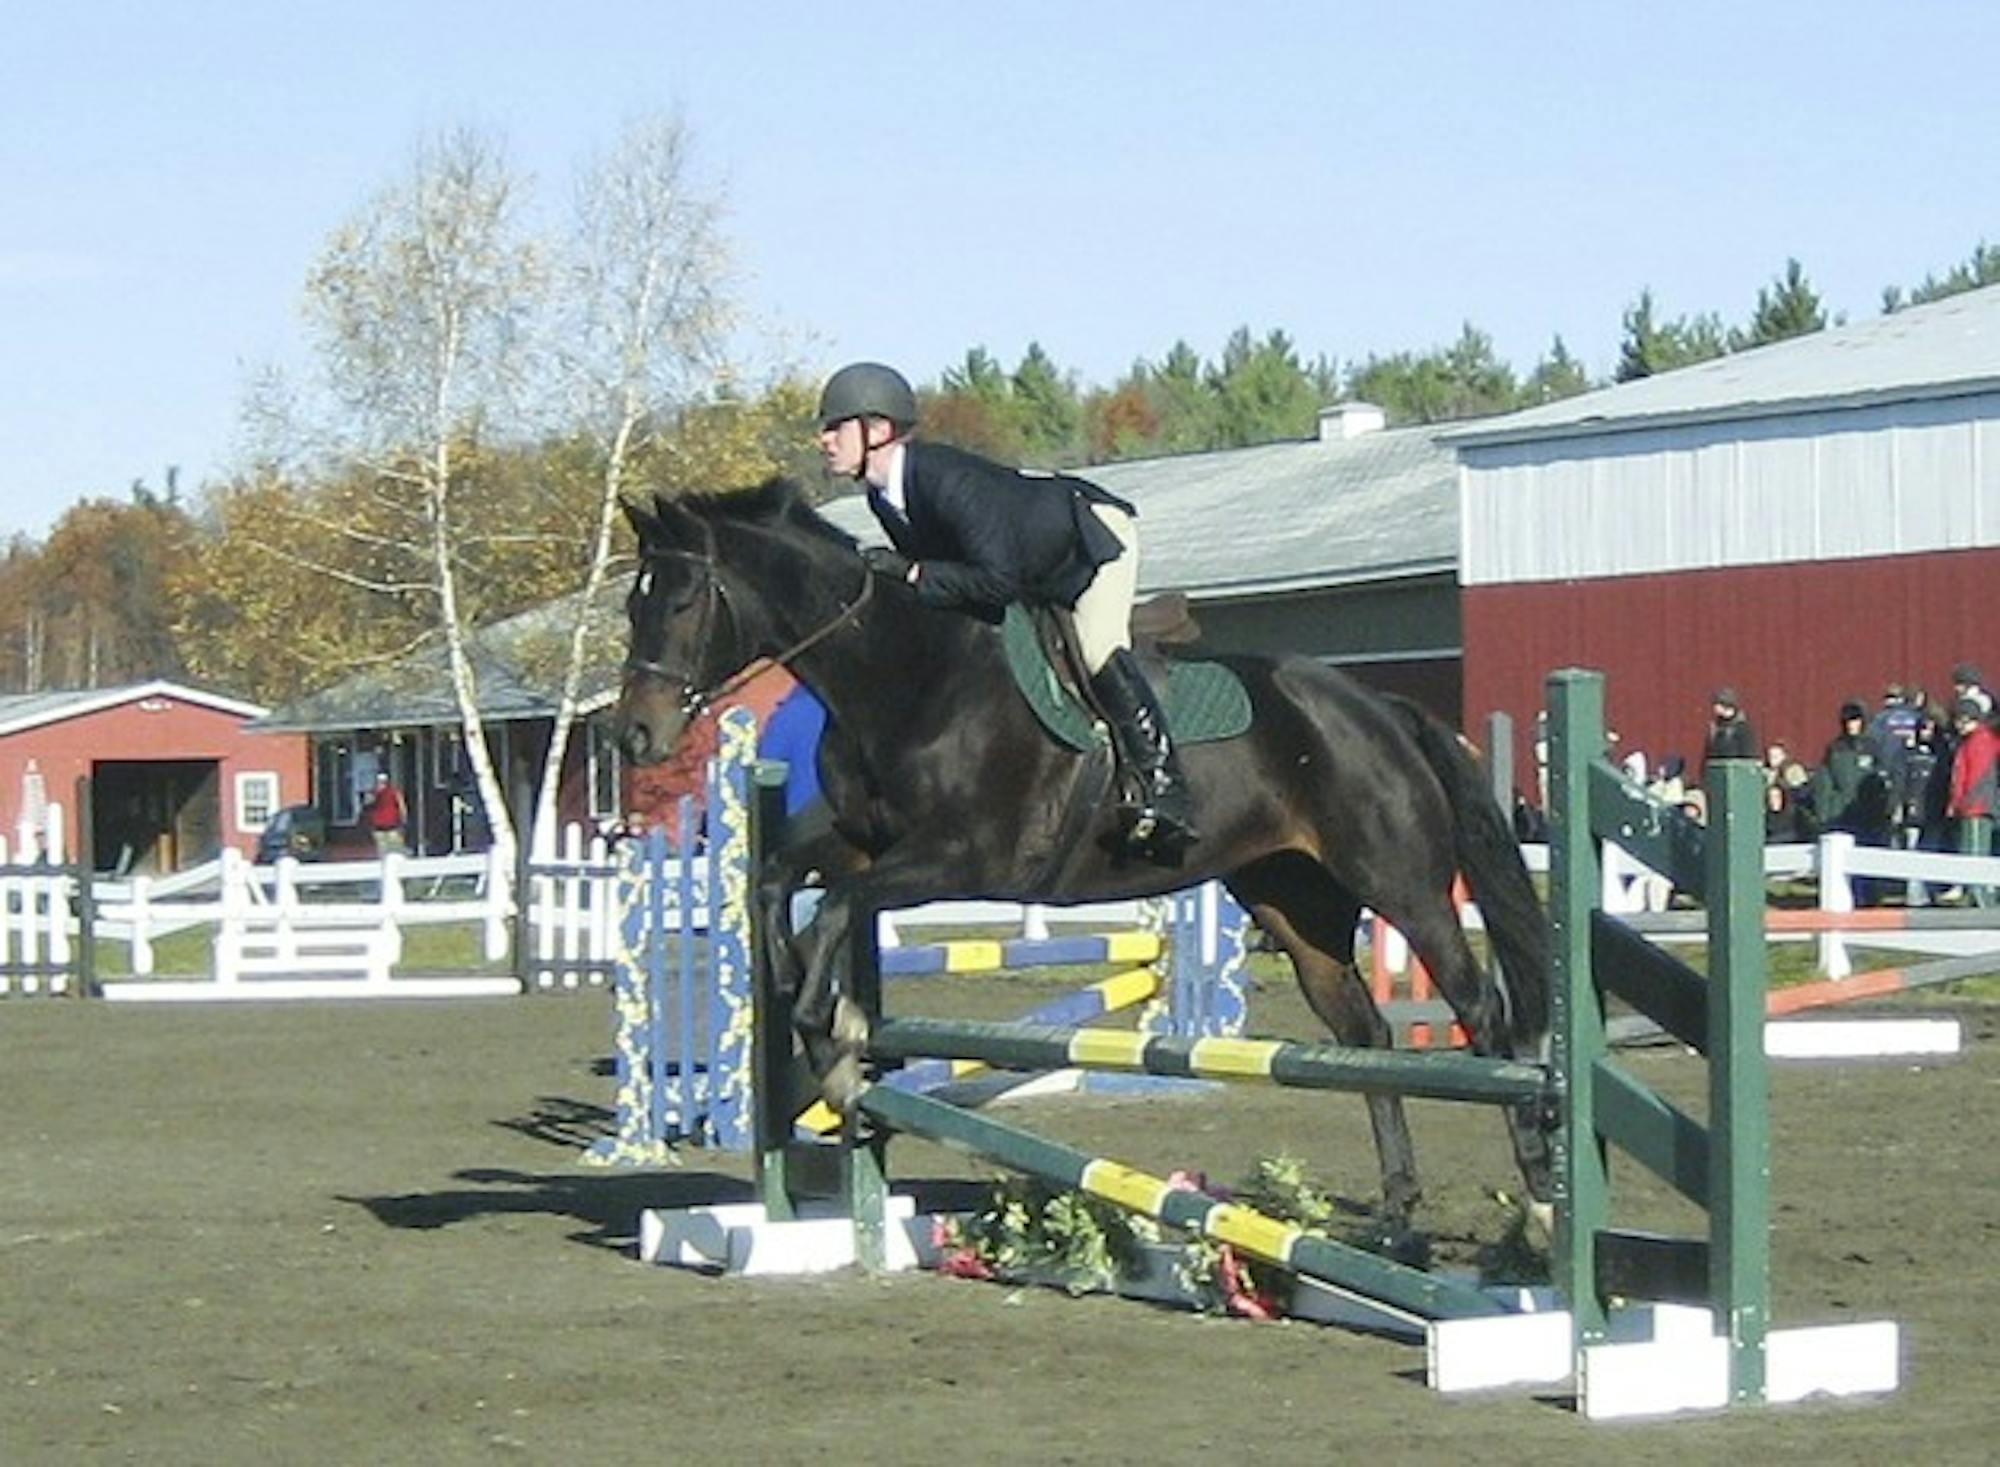 Dartmouth riders rebounded from a fourth-place finish at Colby Sawyer to win nine events and the overall title at the Dartmouth Show on Sunday.